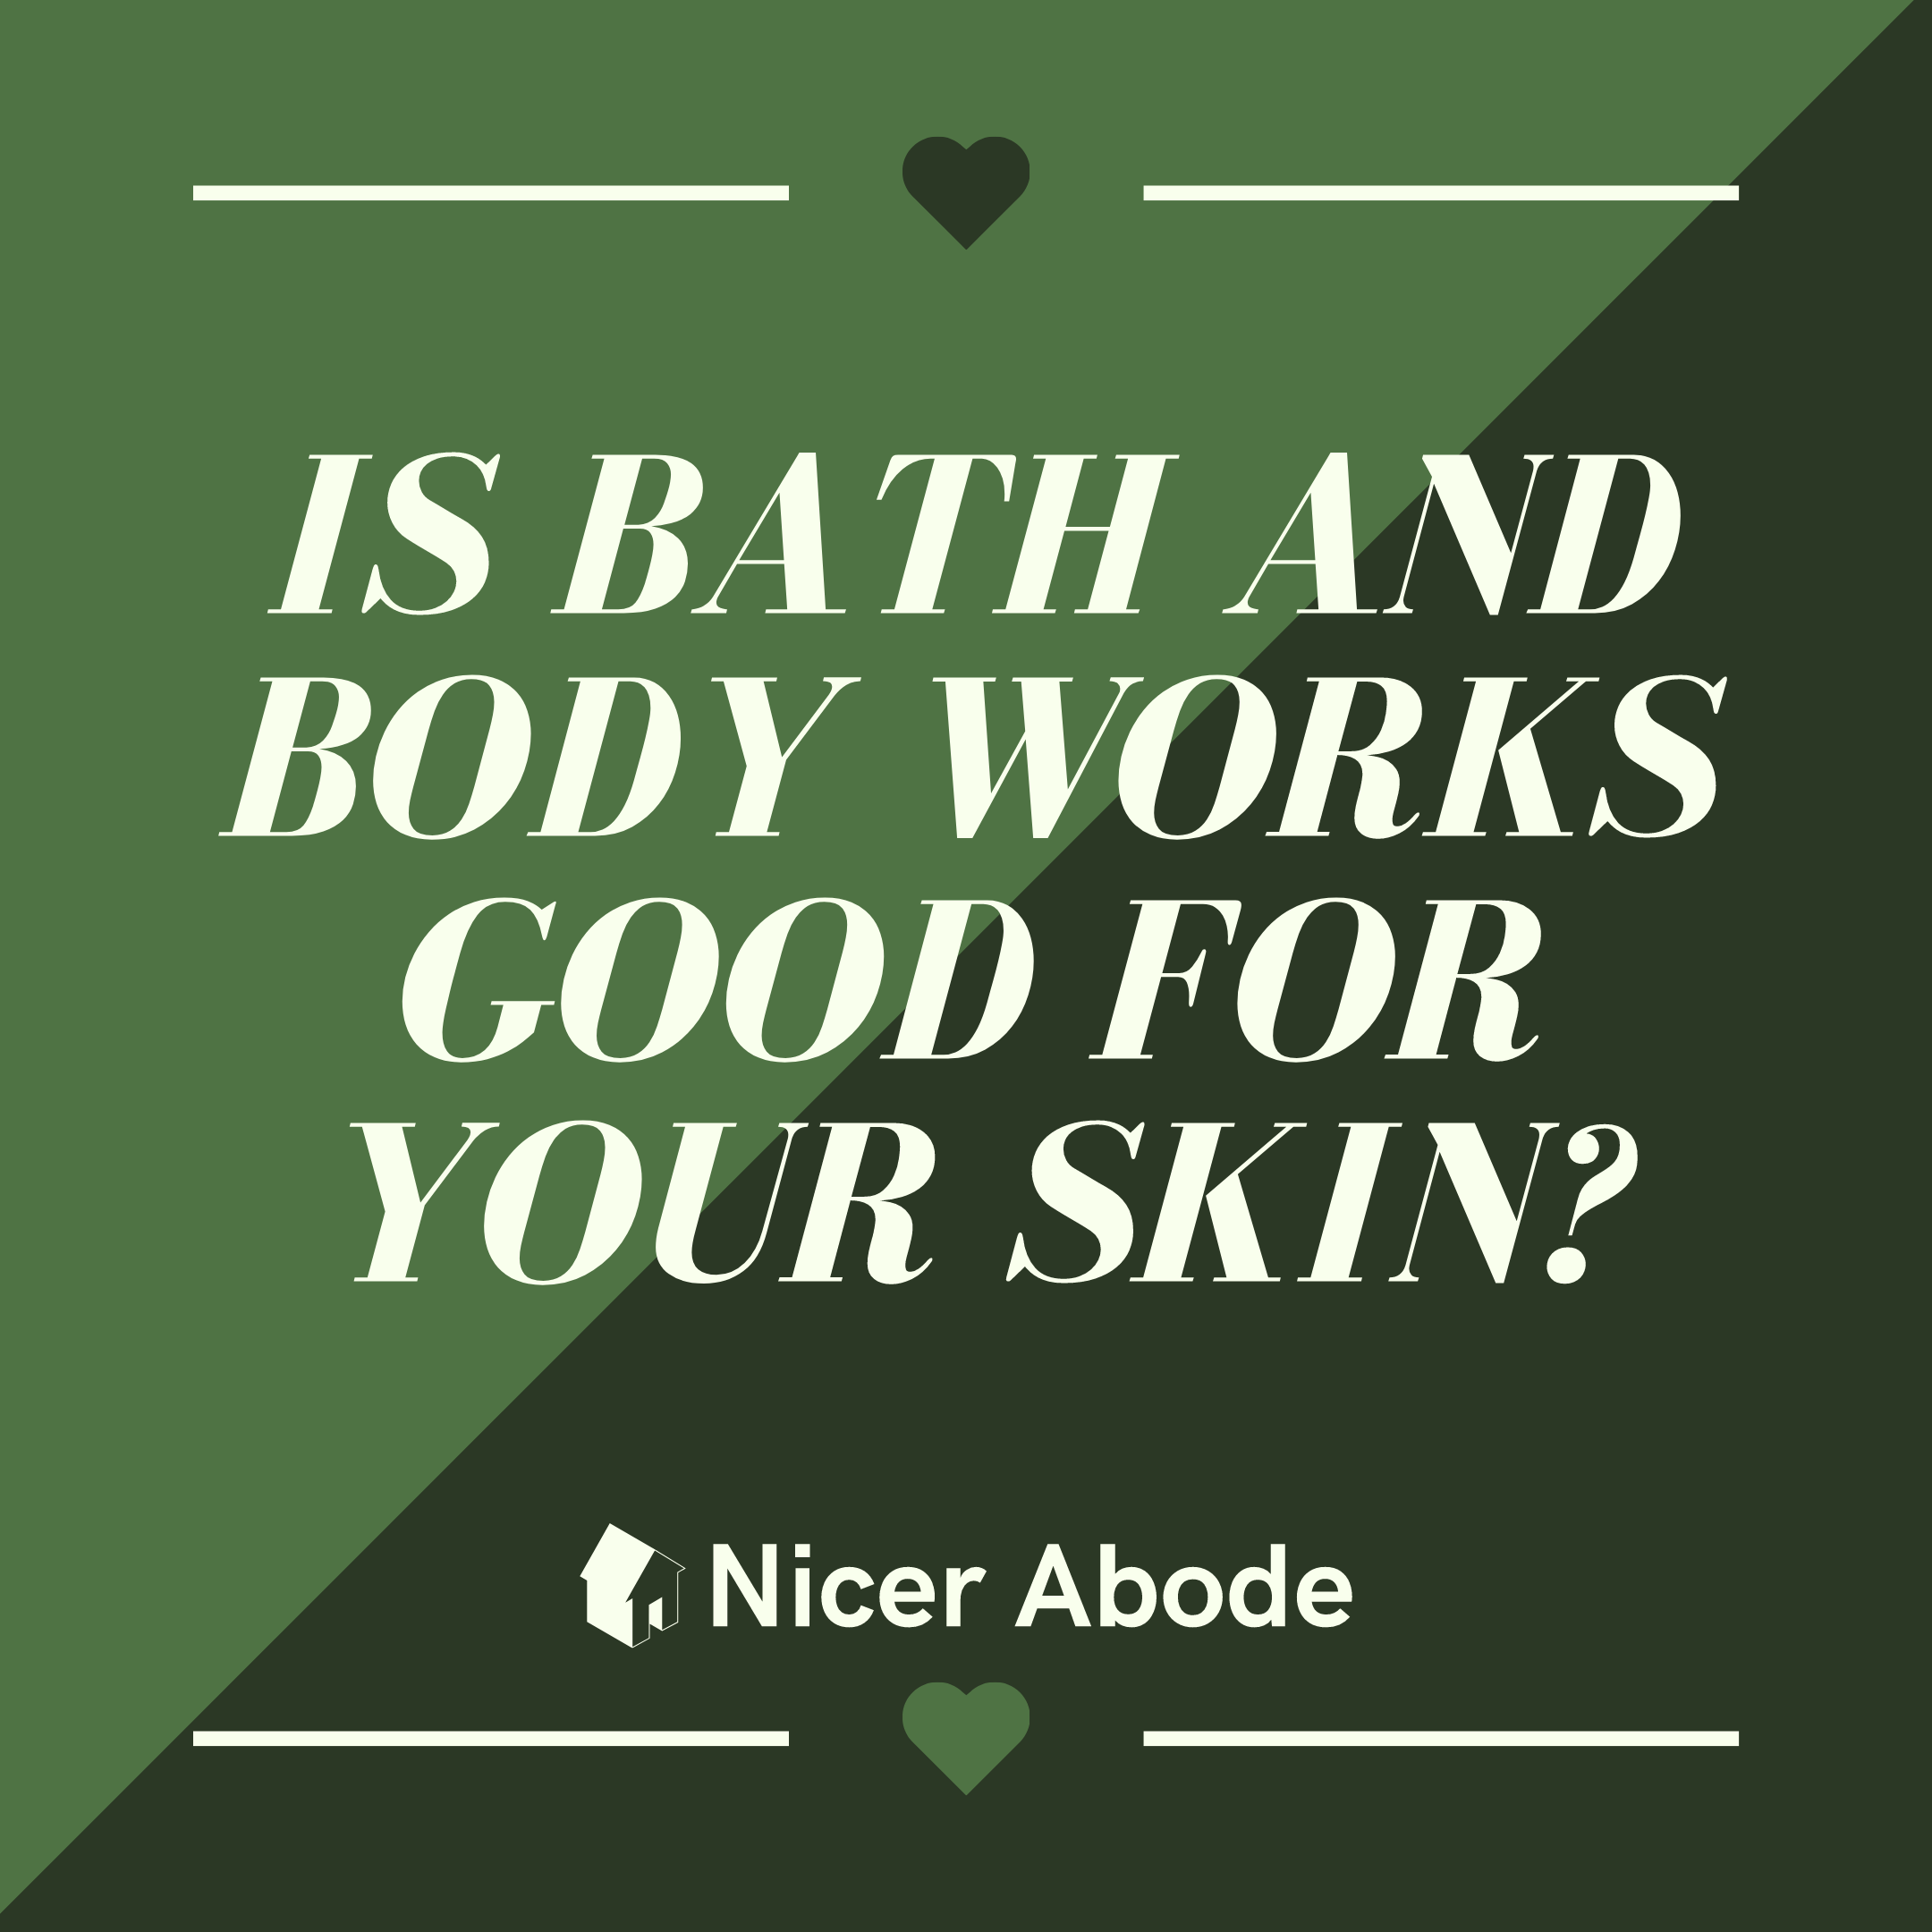 IS-BATH-AND-BODY-WORKS-GOOD-FOR-YOUR-SKIN